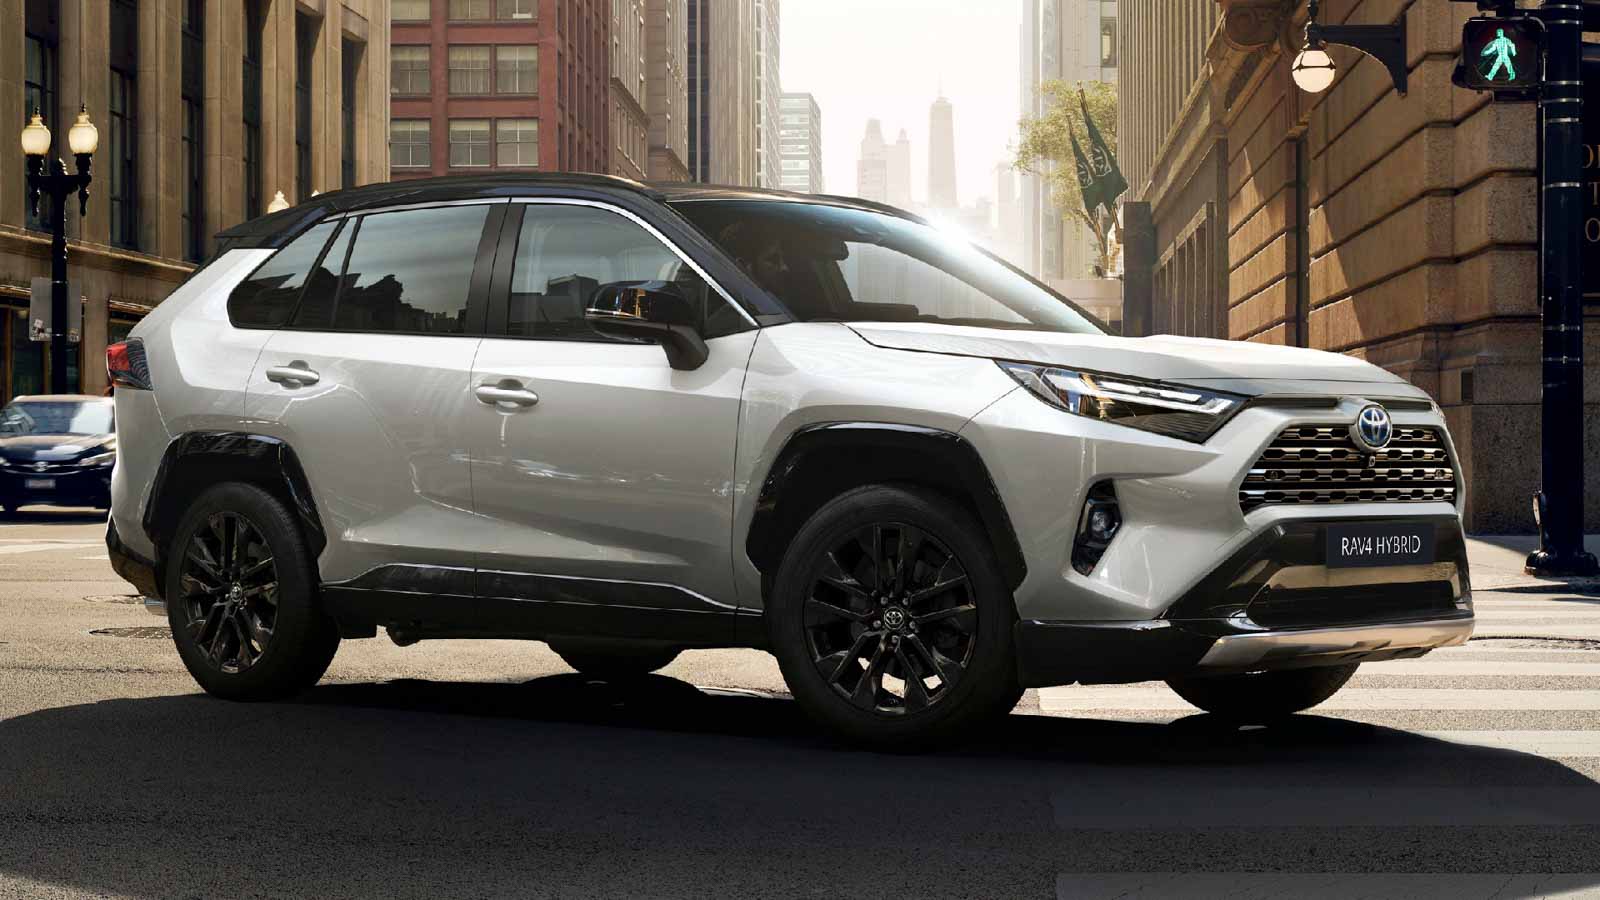 2023 Toyota RAV4 Revealed With Huge Updates - More Appealing Now